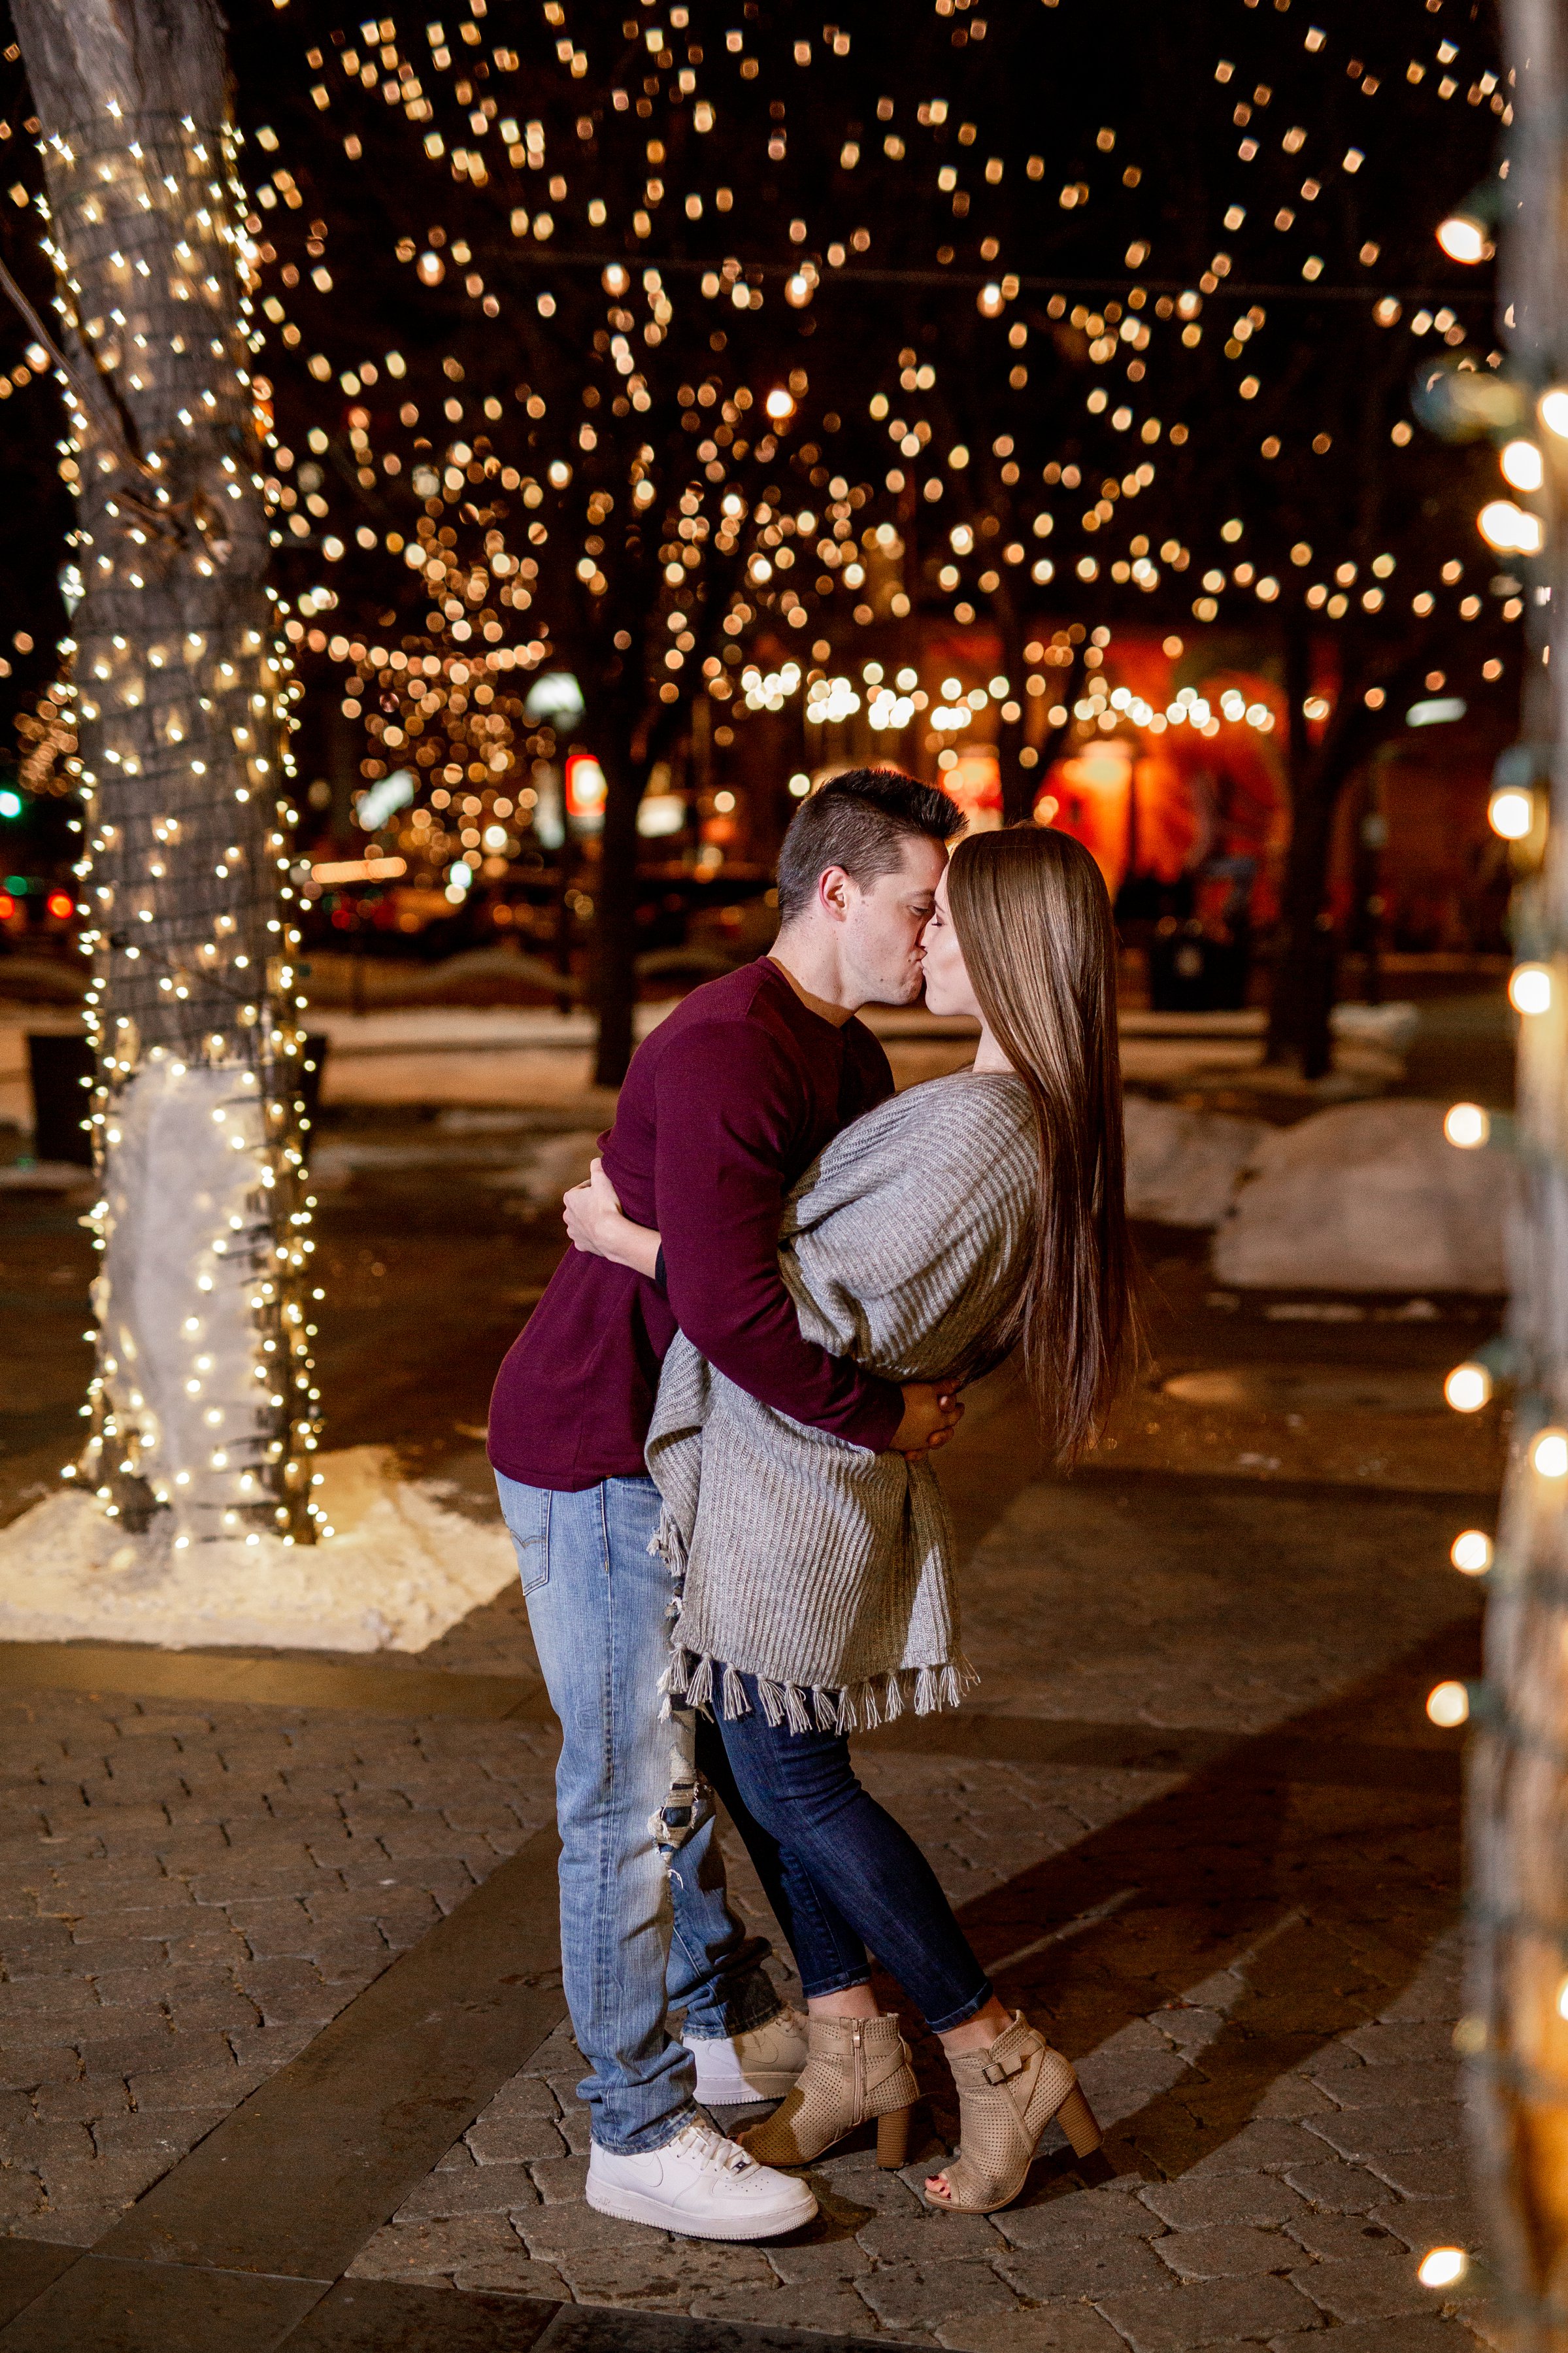 Engaged couple in downtown fort collins lights at night with snow on ground